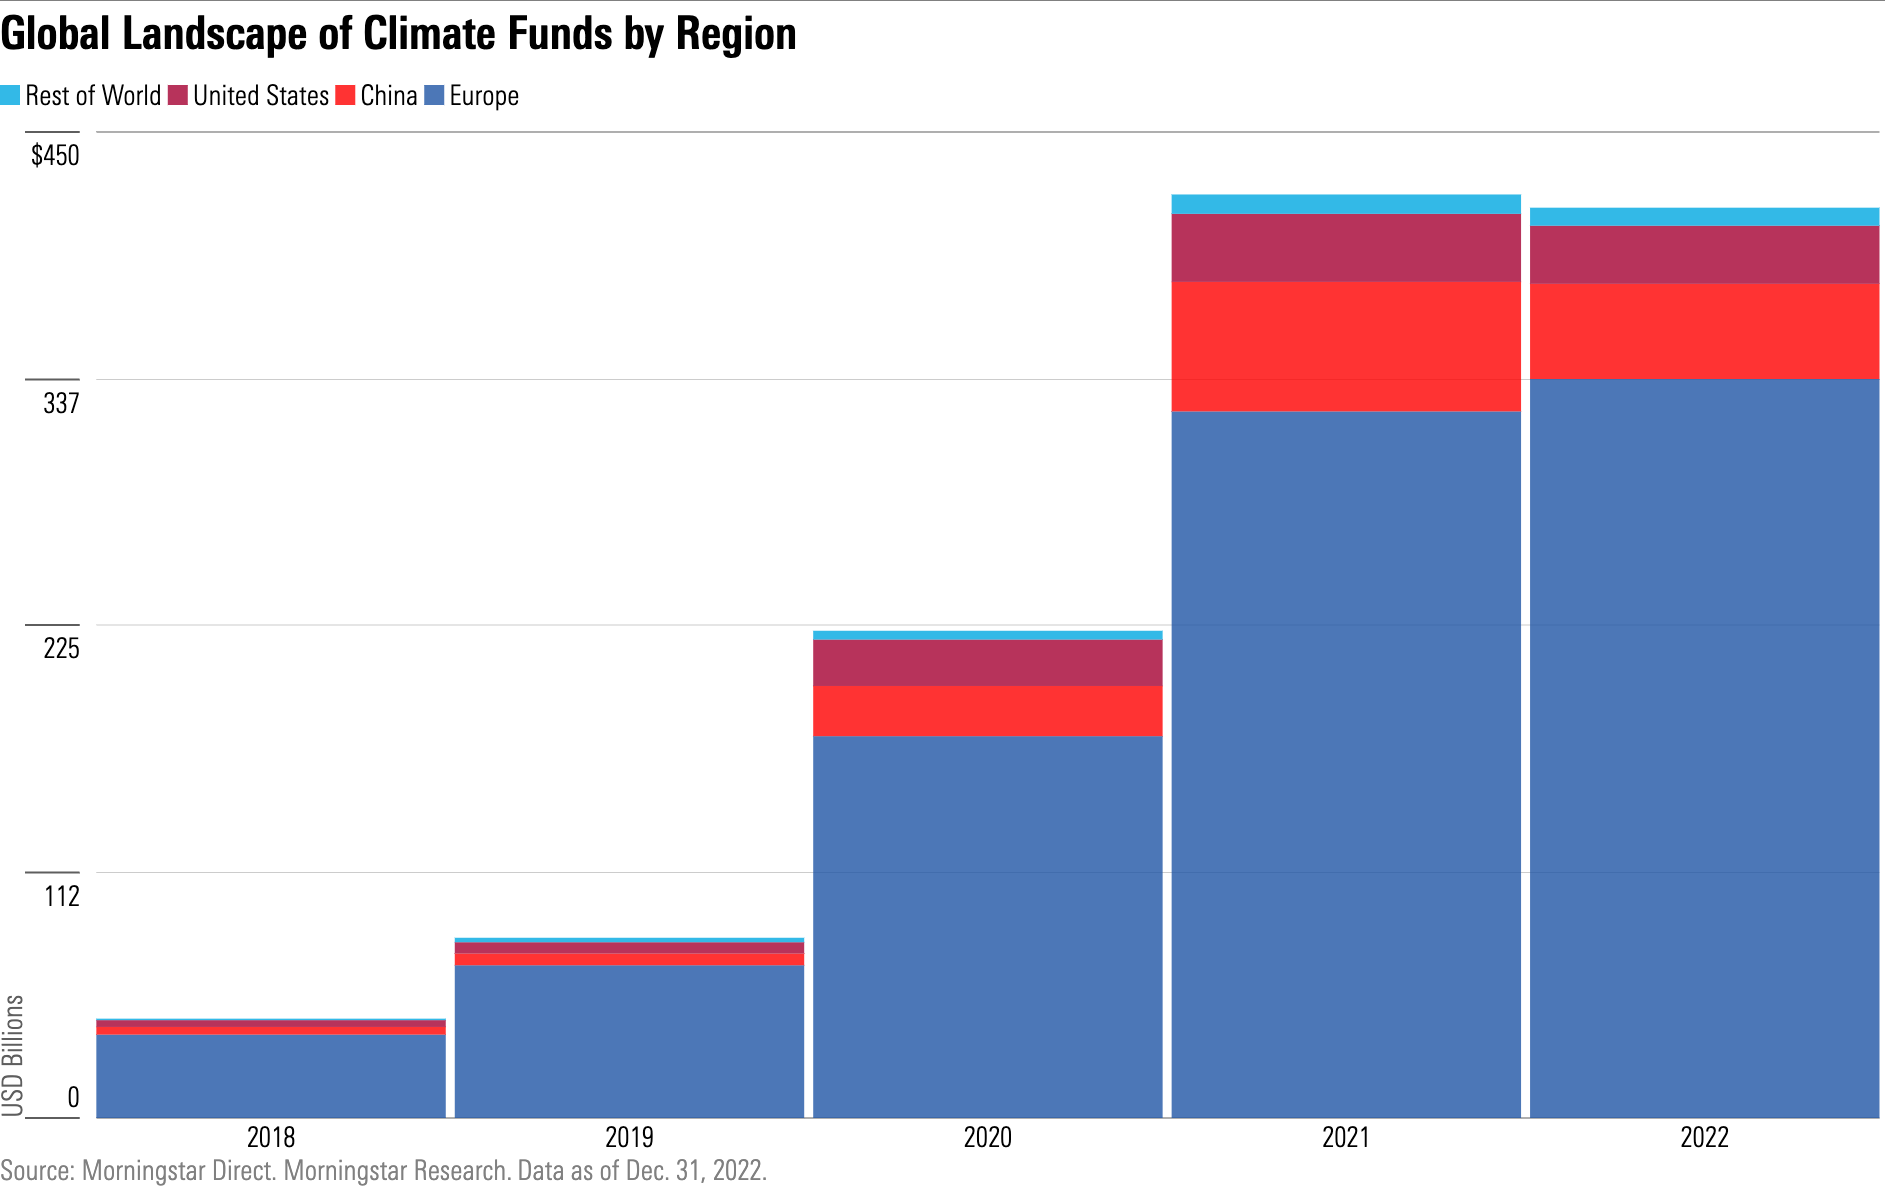 Stacked bar chart showing that the vast majority of climate funds AUM are in Europe, with small amounts in the U.S., China, and Rest of World.